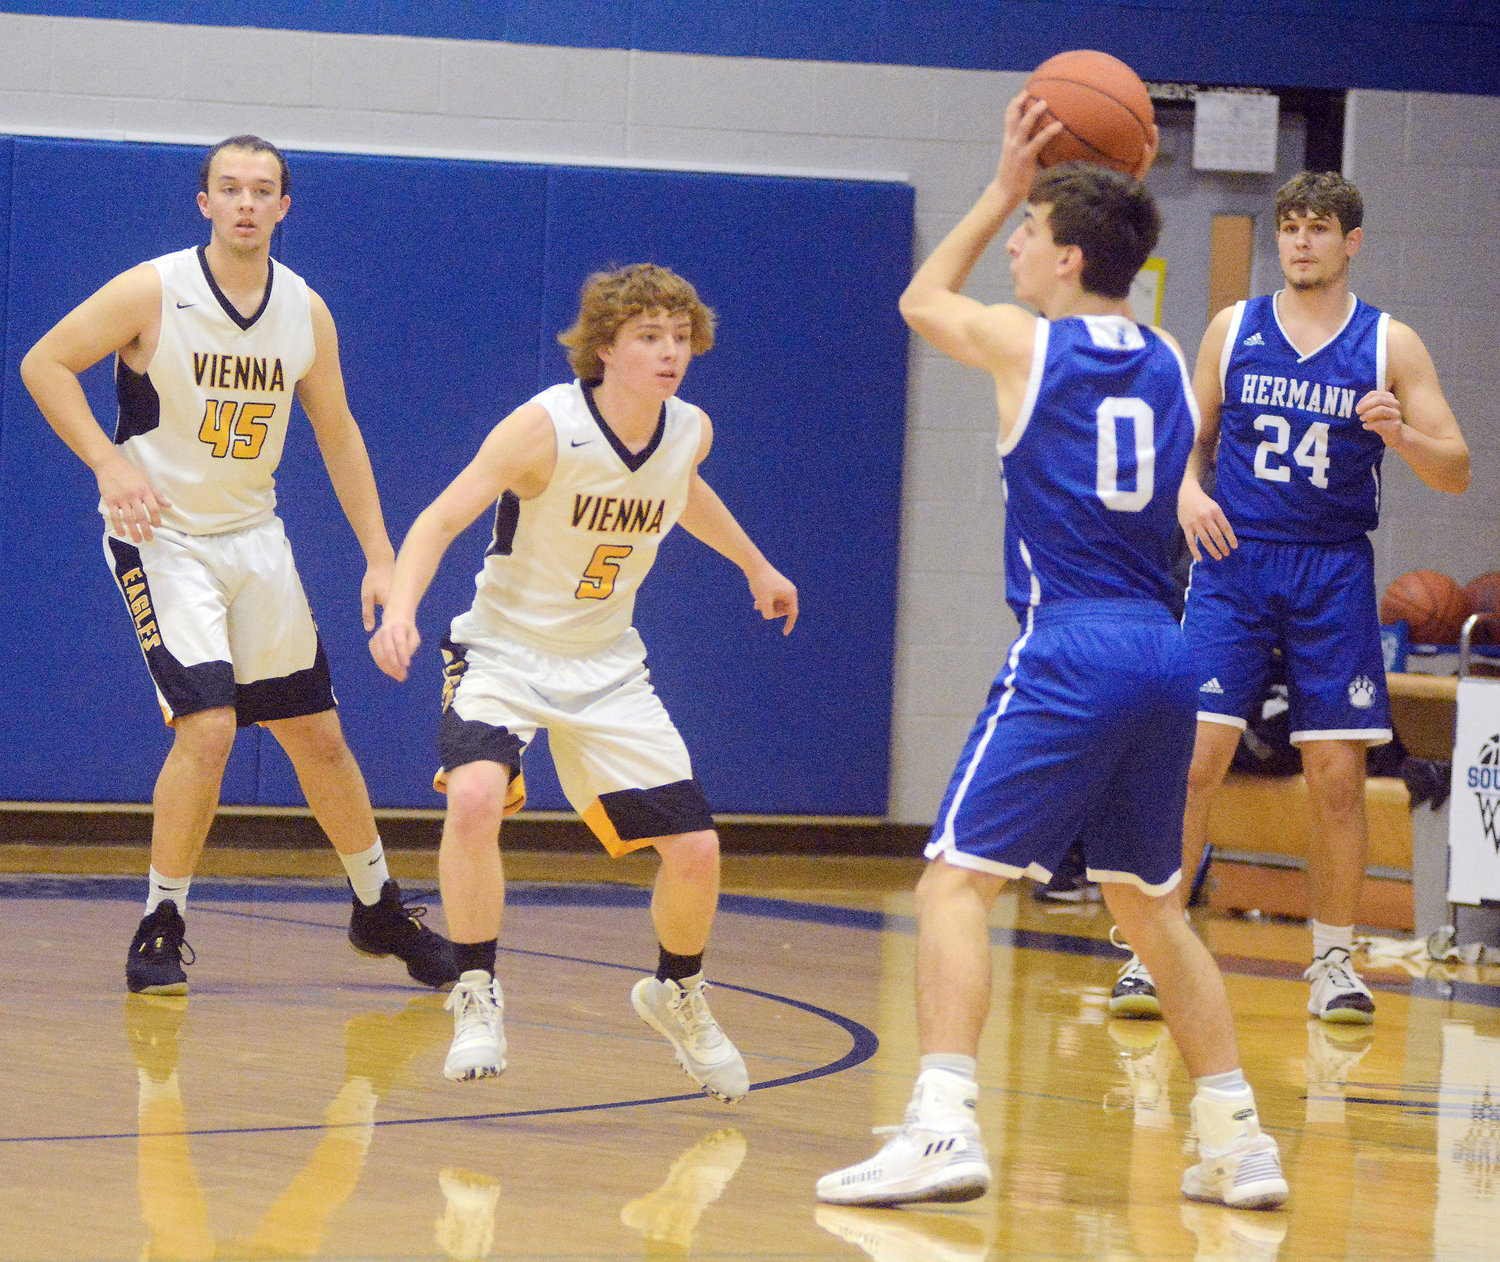 Lucas Magner (second from left) guards Hermann Bearcat ball handler Connor Coffey with Snodgrass behind him also on defense.